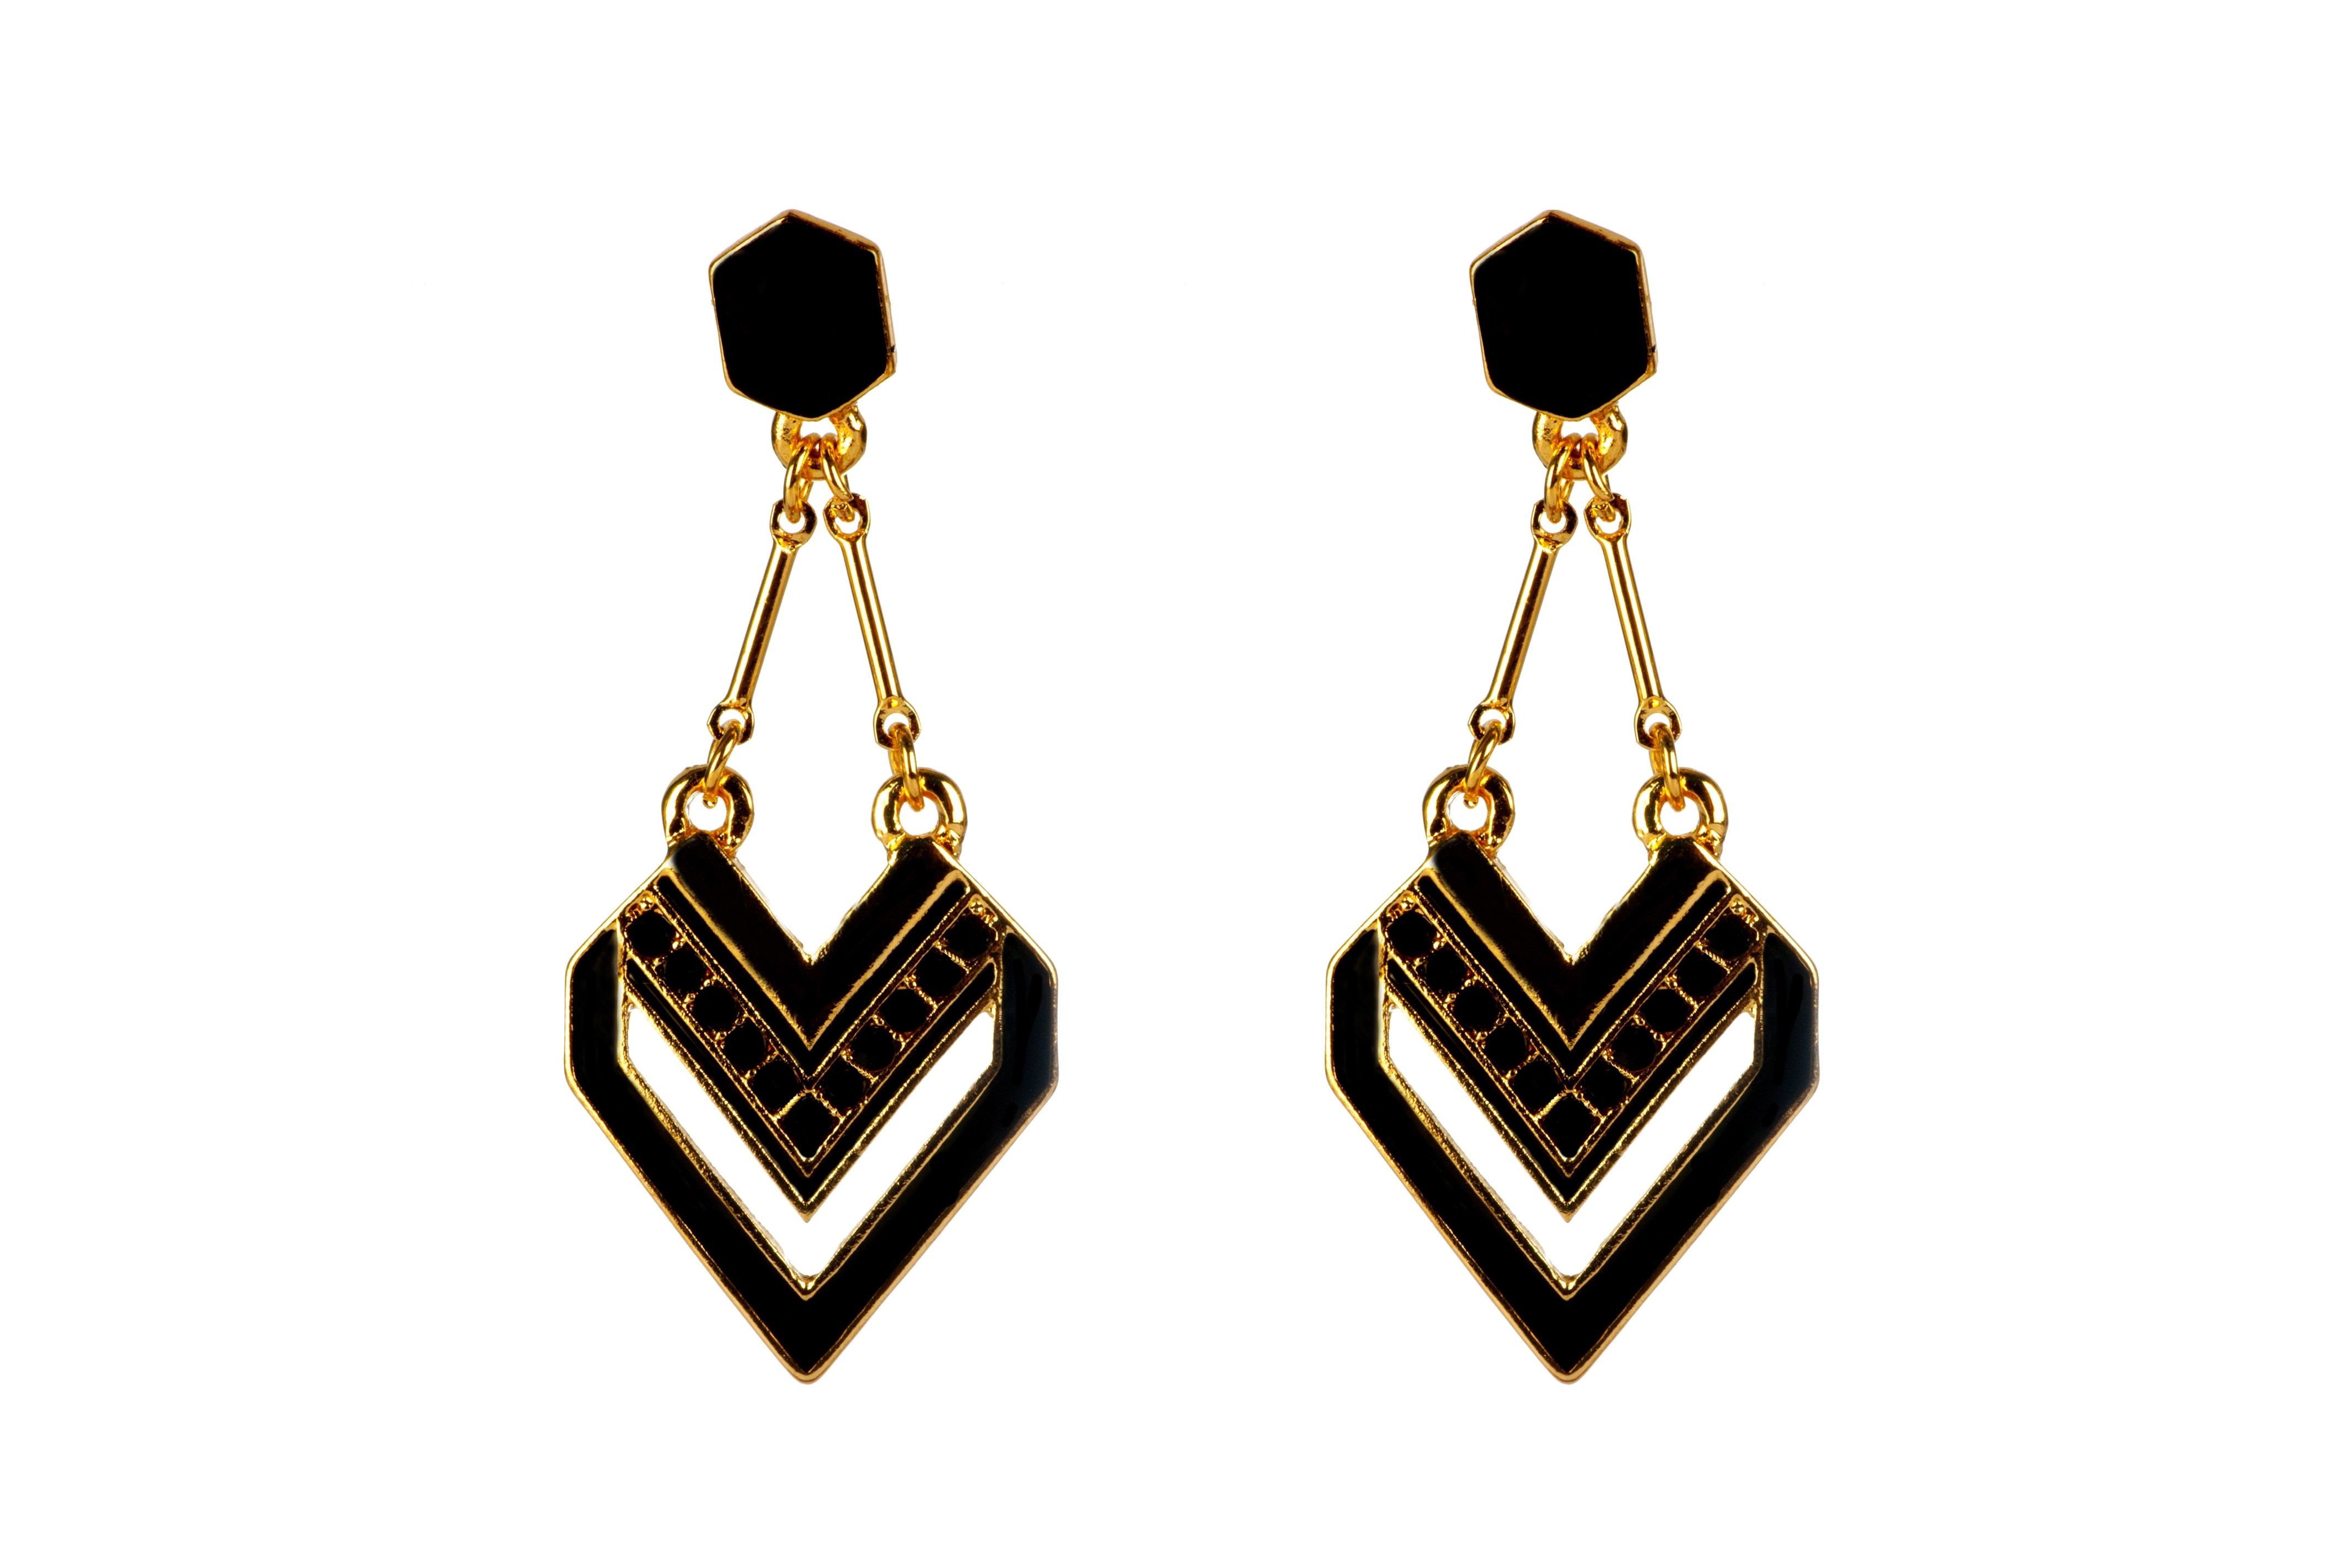 pair of gold and black earrings